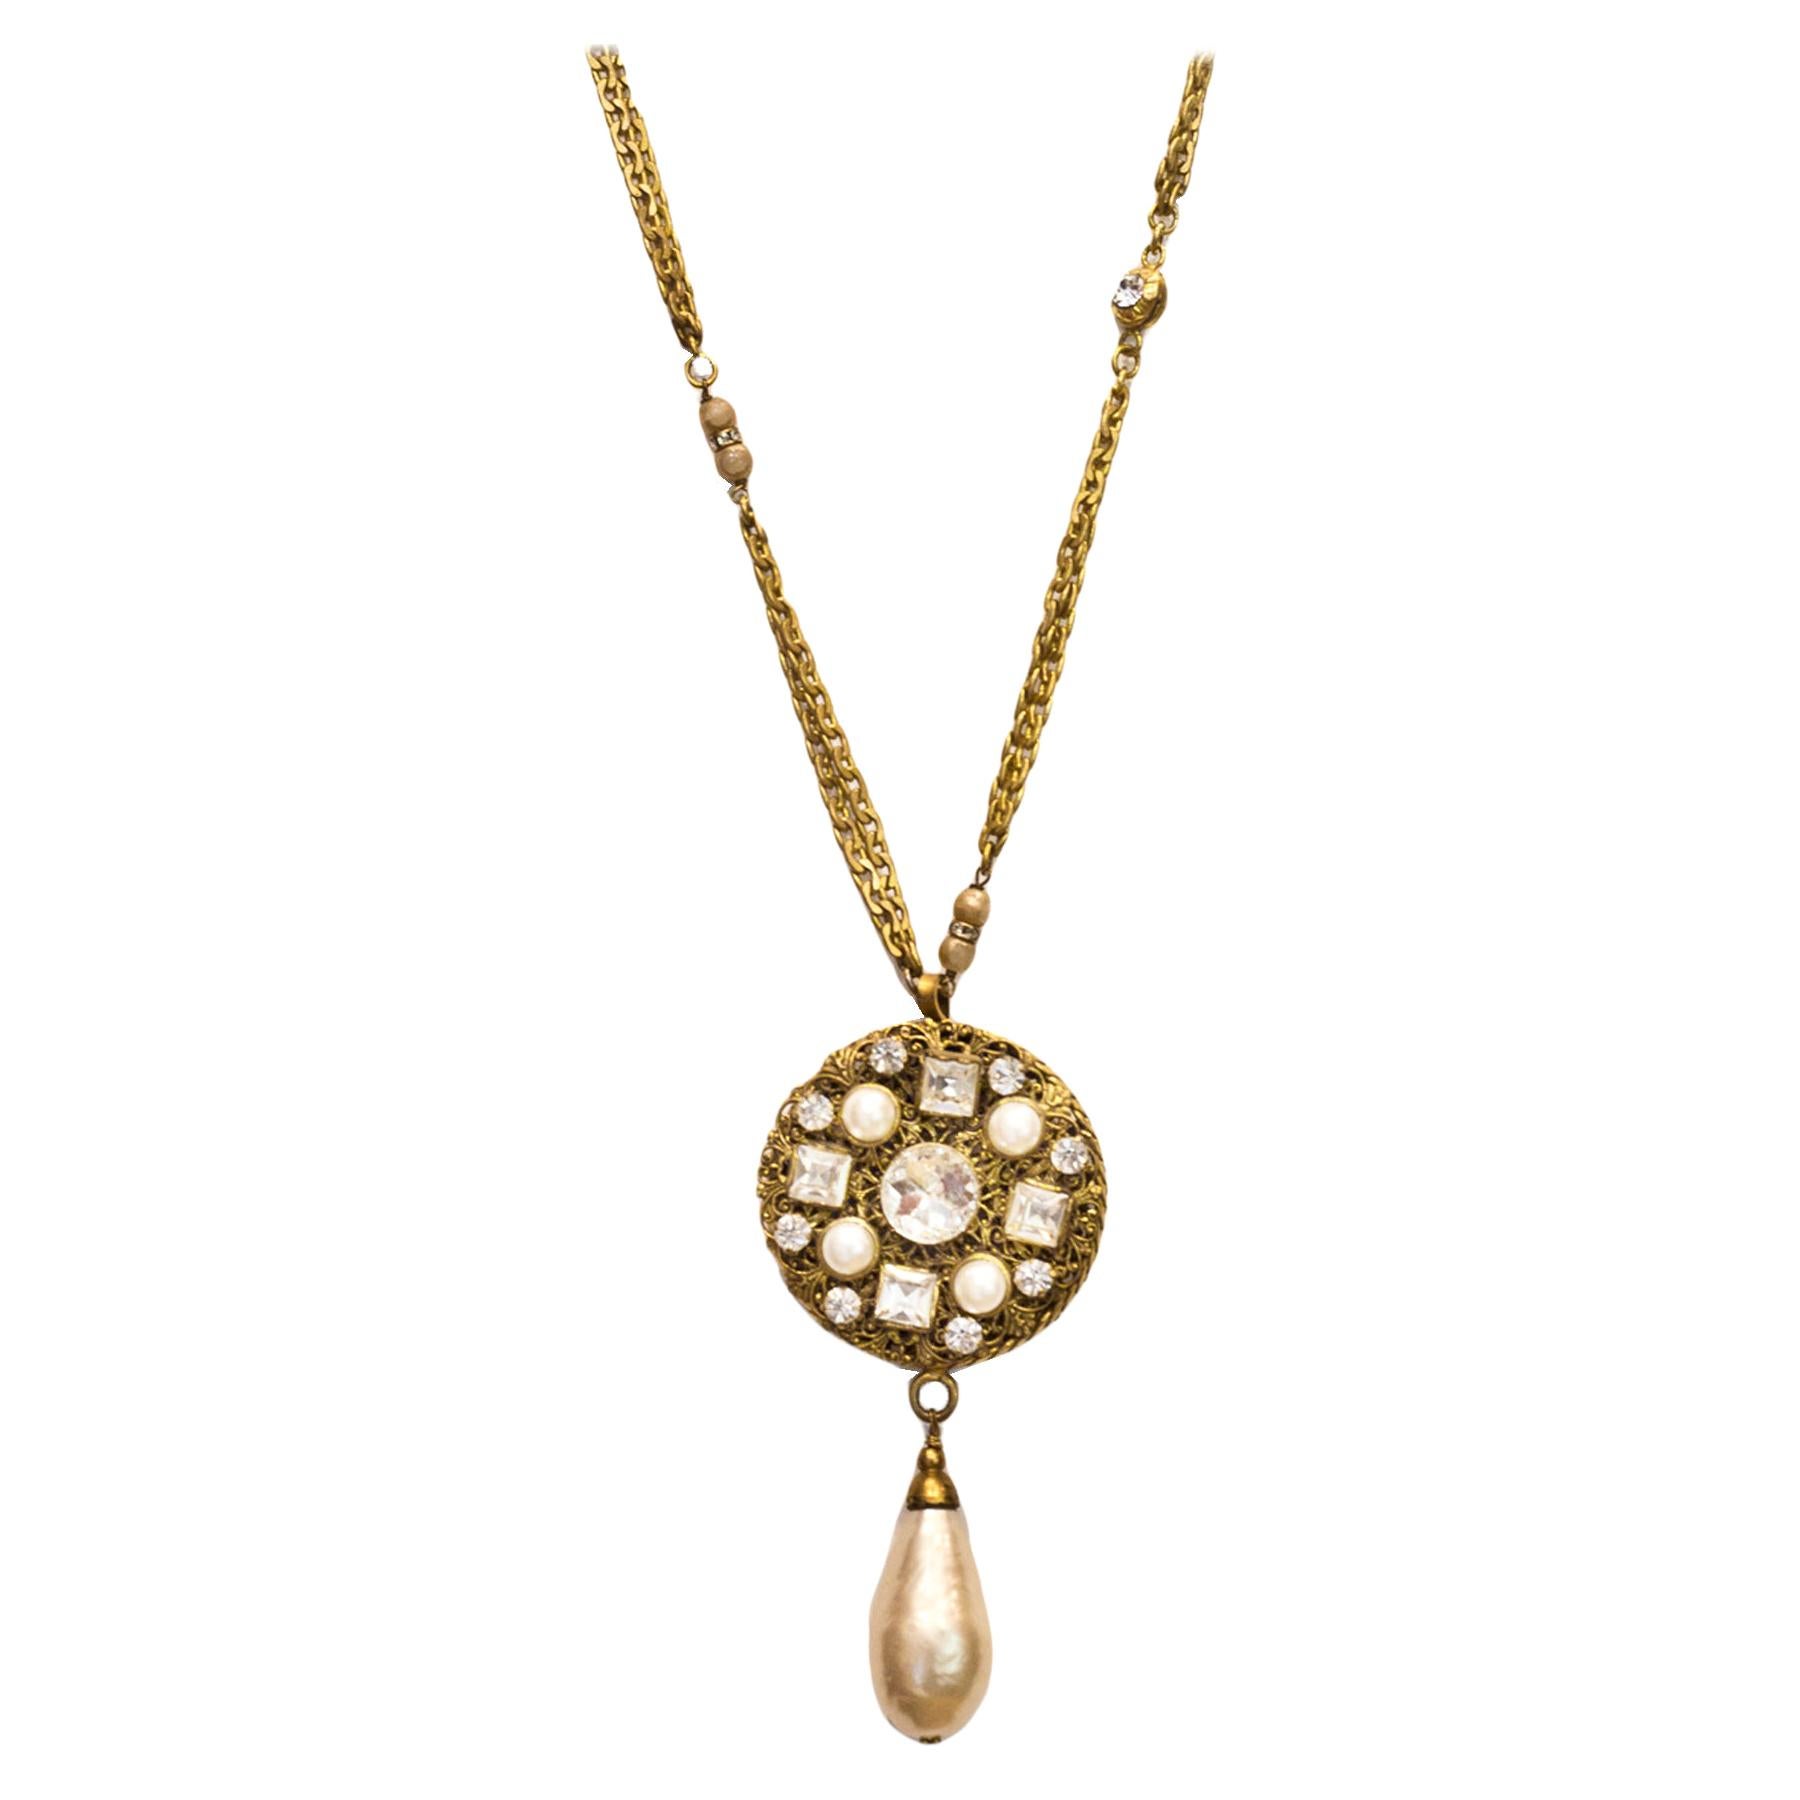 Chanel Vintage 1984 Crystal & Faux Pearl Medallion Necklace